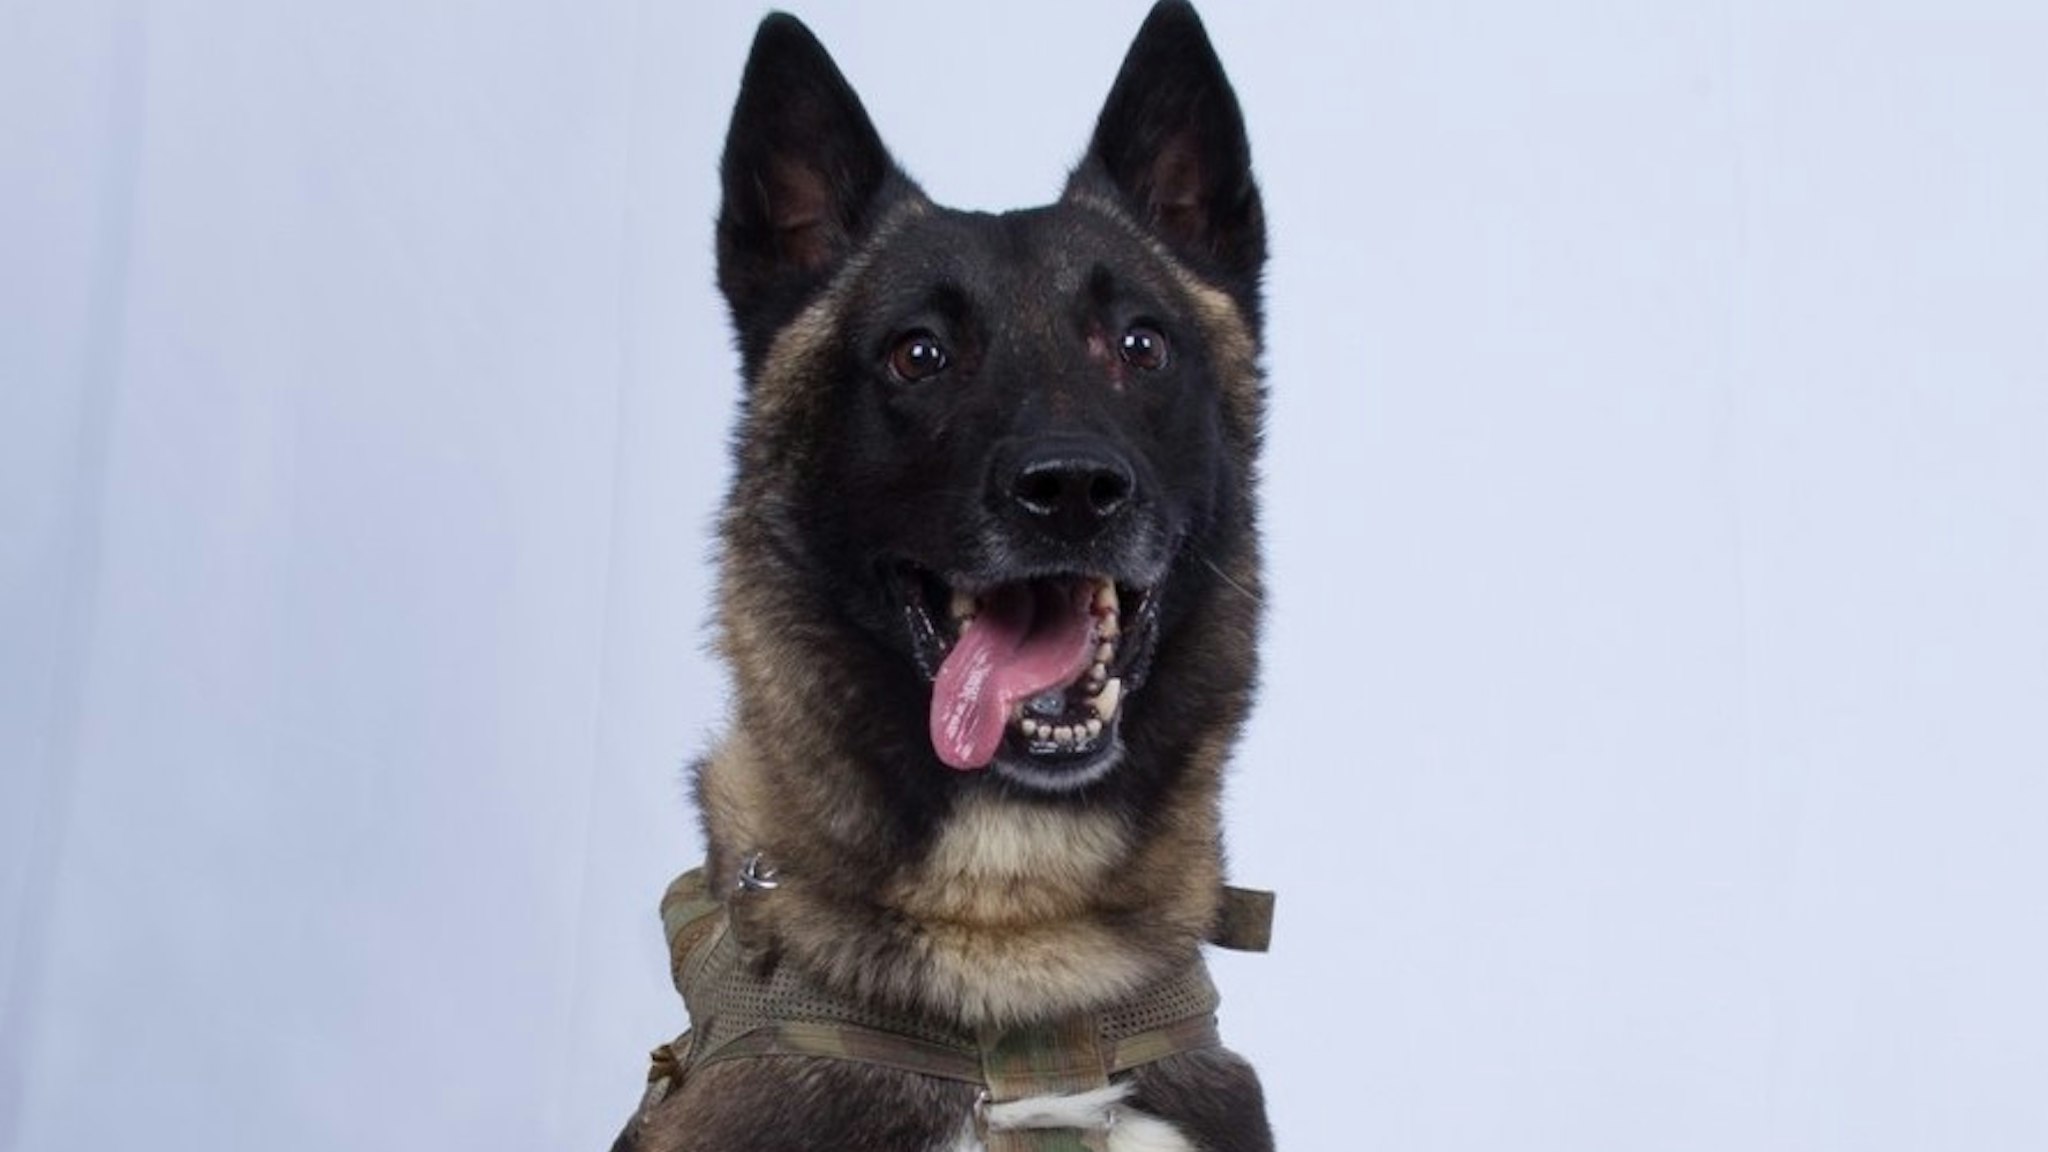 DOD Photo. The military working dog who sustained minor injuries during the raid has returned to duty.